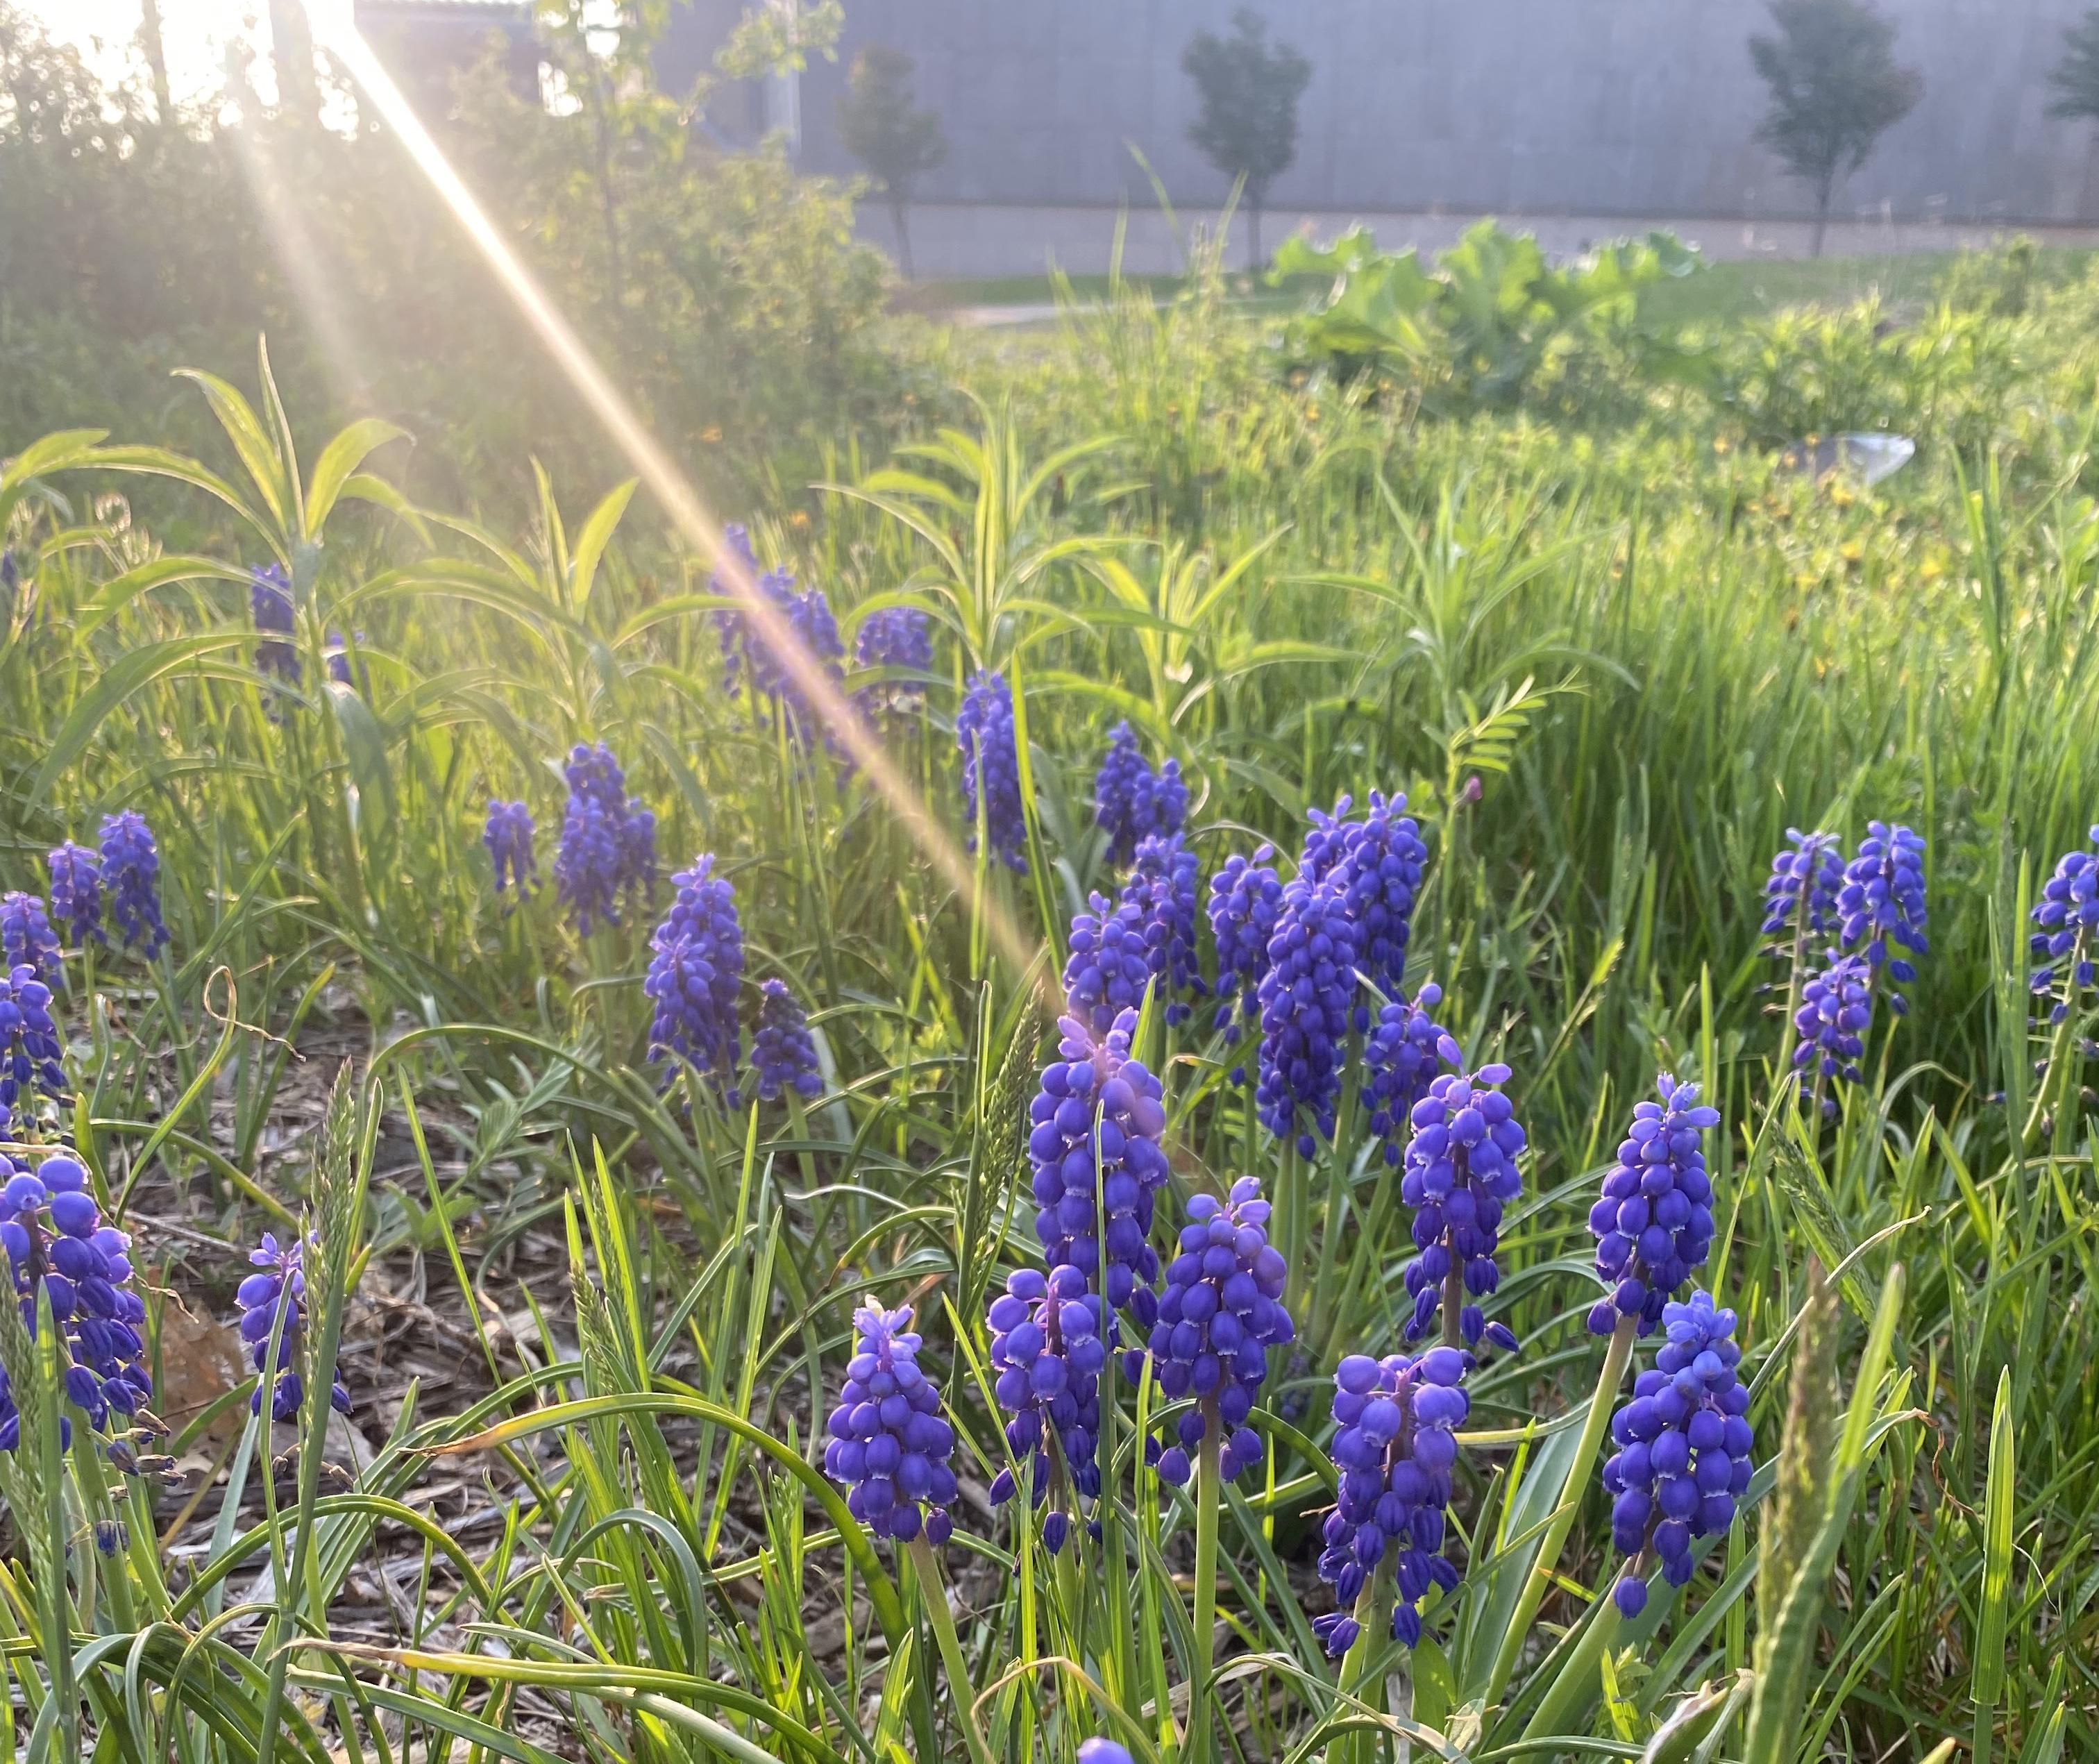 The sun shines in on an angle upon purple blooms and green grass